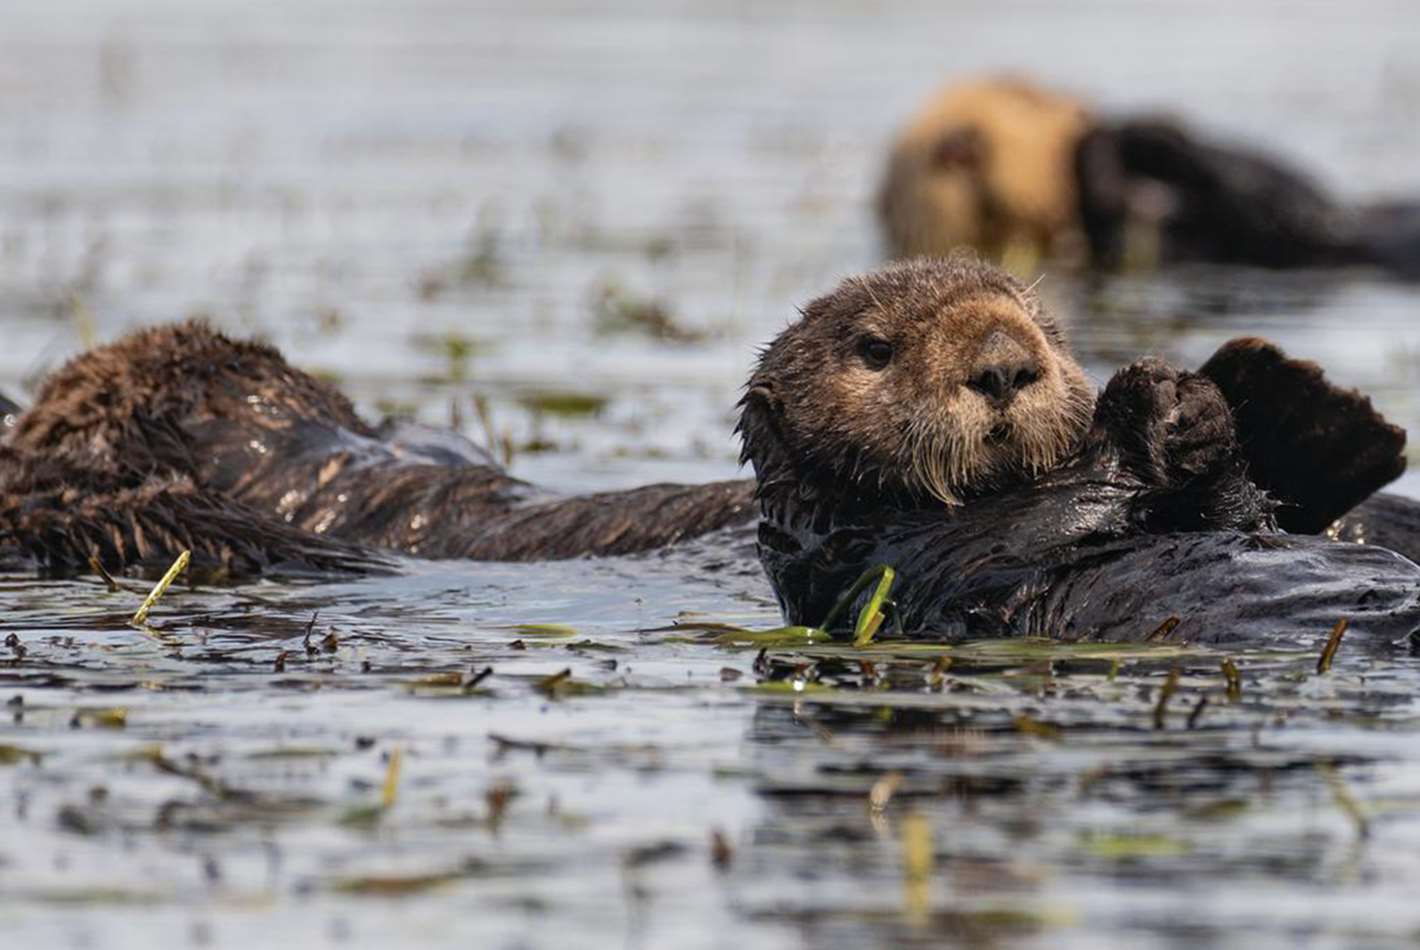 Sea otters can be furry climate warriors | Stories | Monterey Bay Aquarium